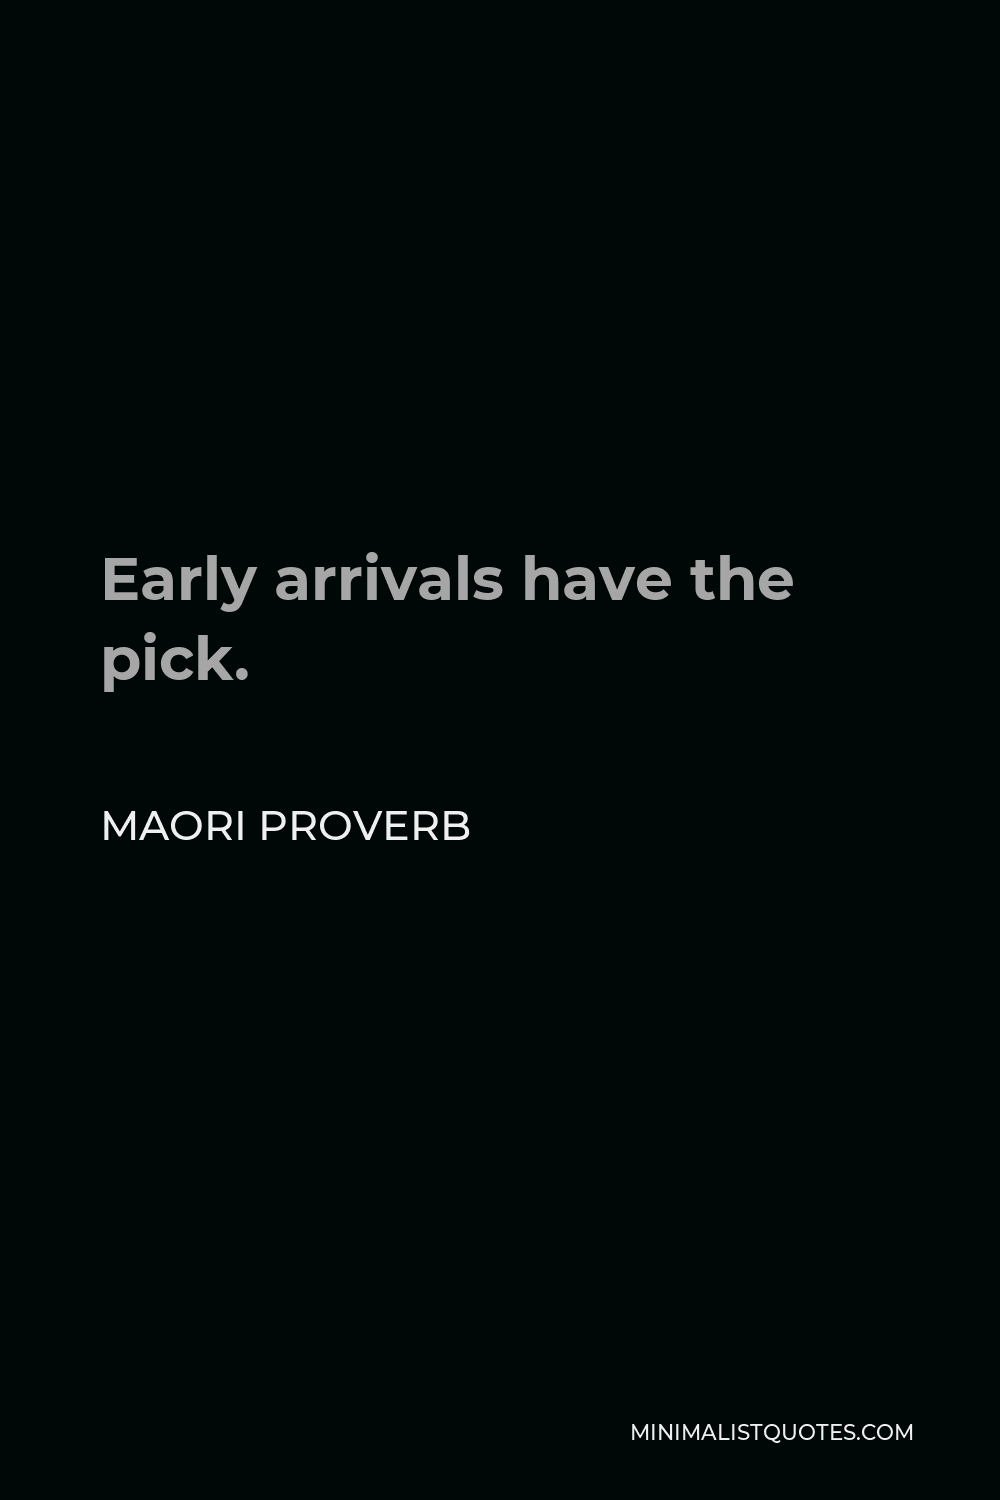 Maori Proverb Quote - Early arrivals have the pick.